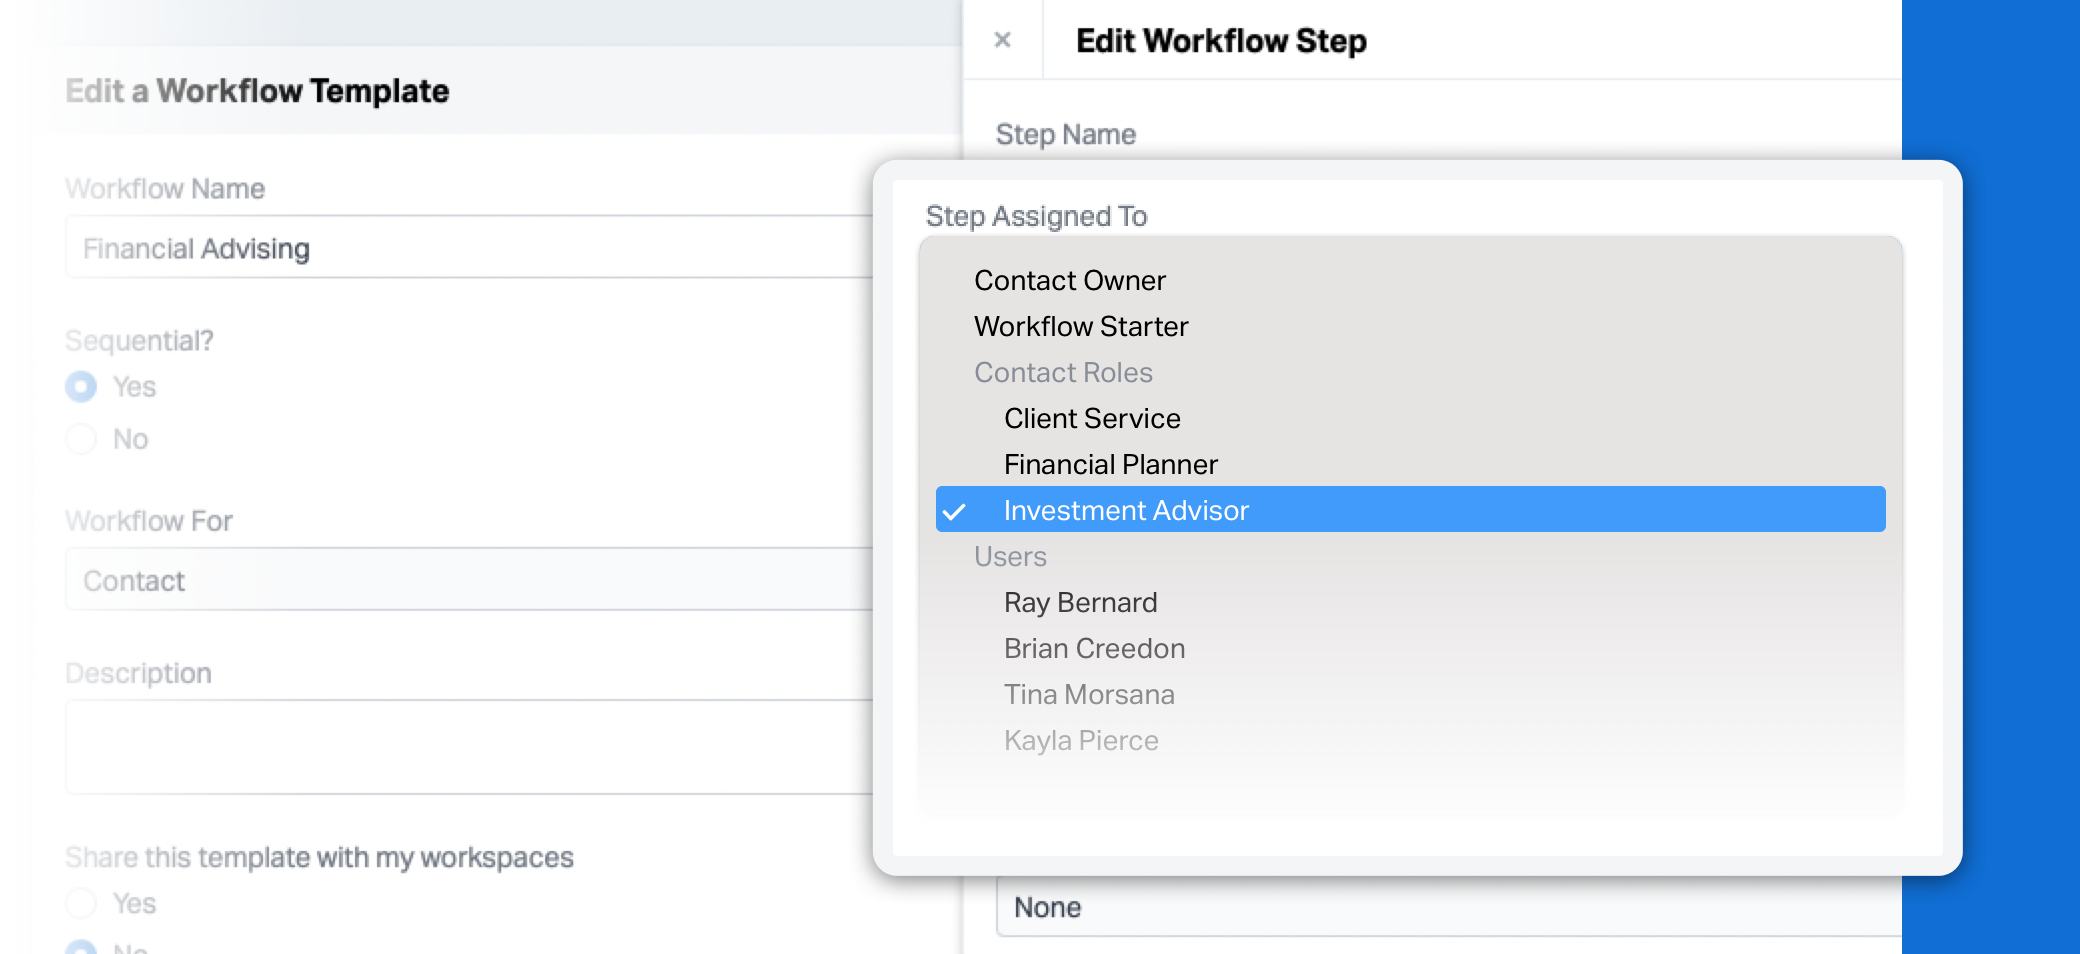 New Feature: Workflow Assignments with Contact Roles